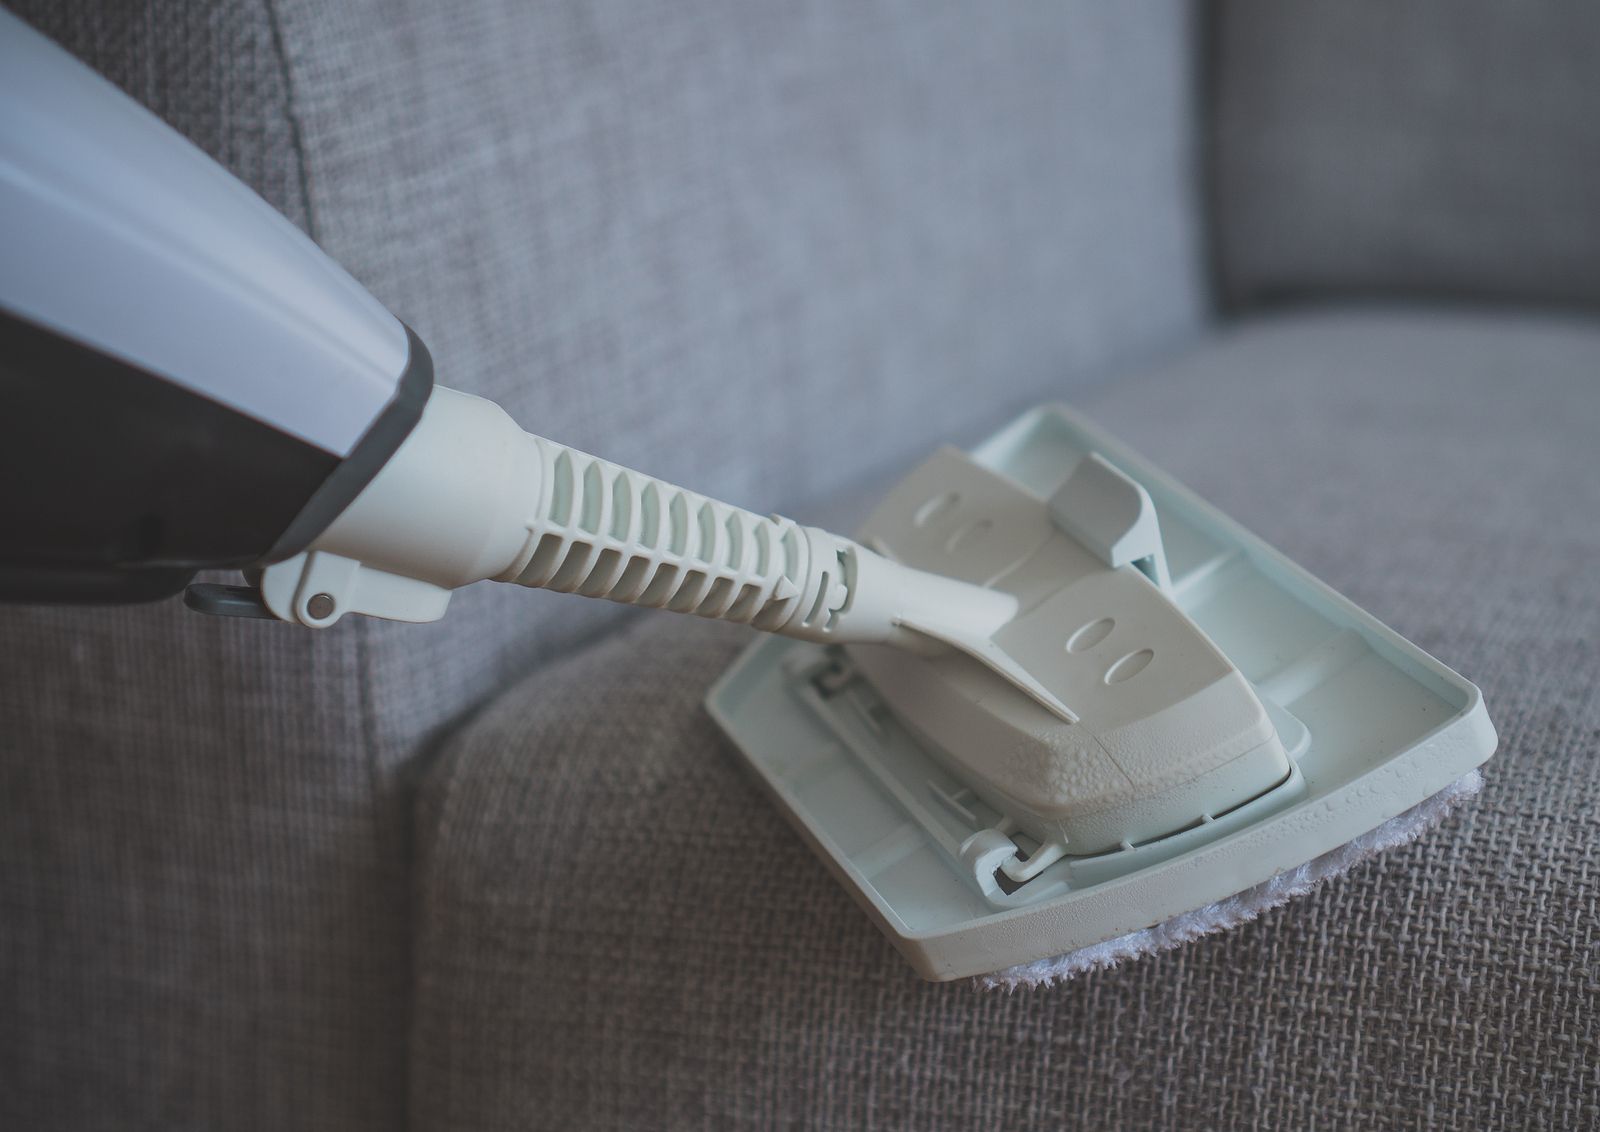 Nearby Upholstery Cleaning Services